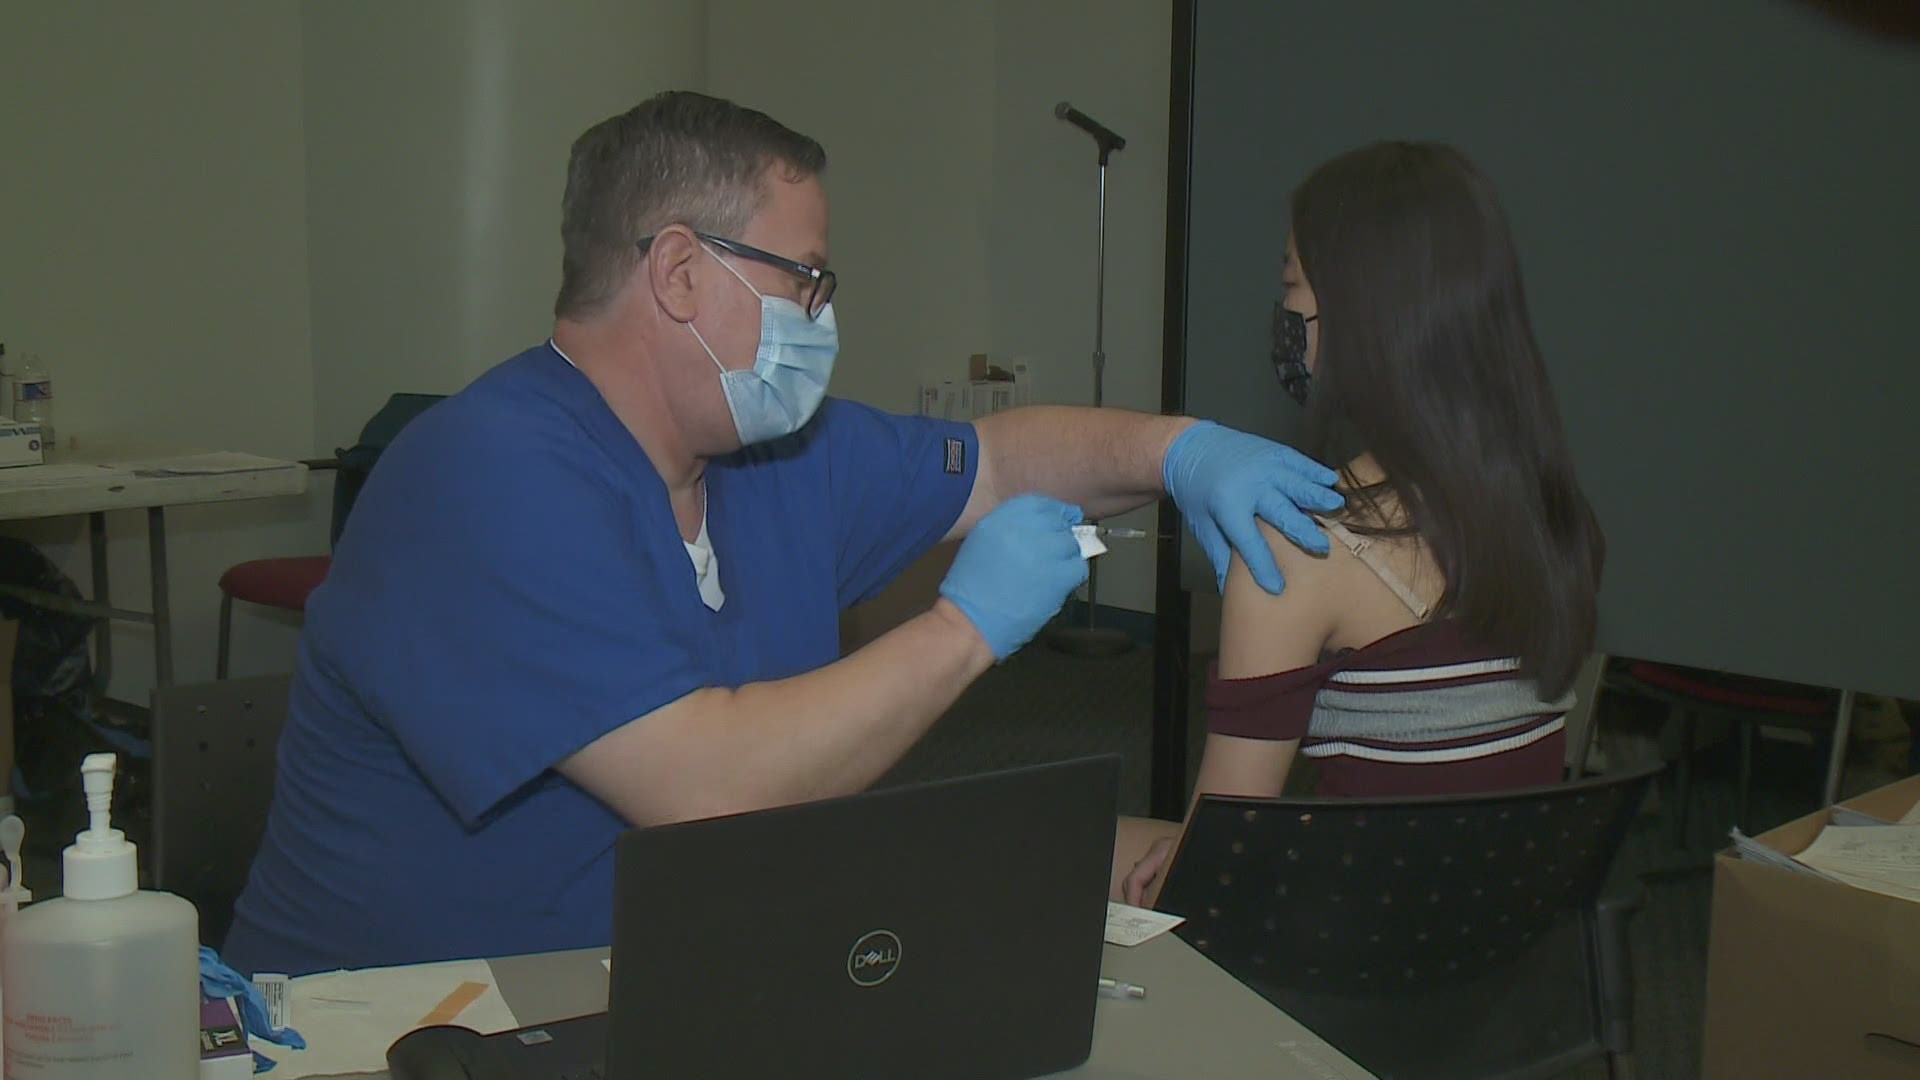 Tulane University officials are requiring students to be vaccinated before the fall semester starts unless they decline due to health or religious reasons.